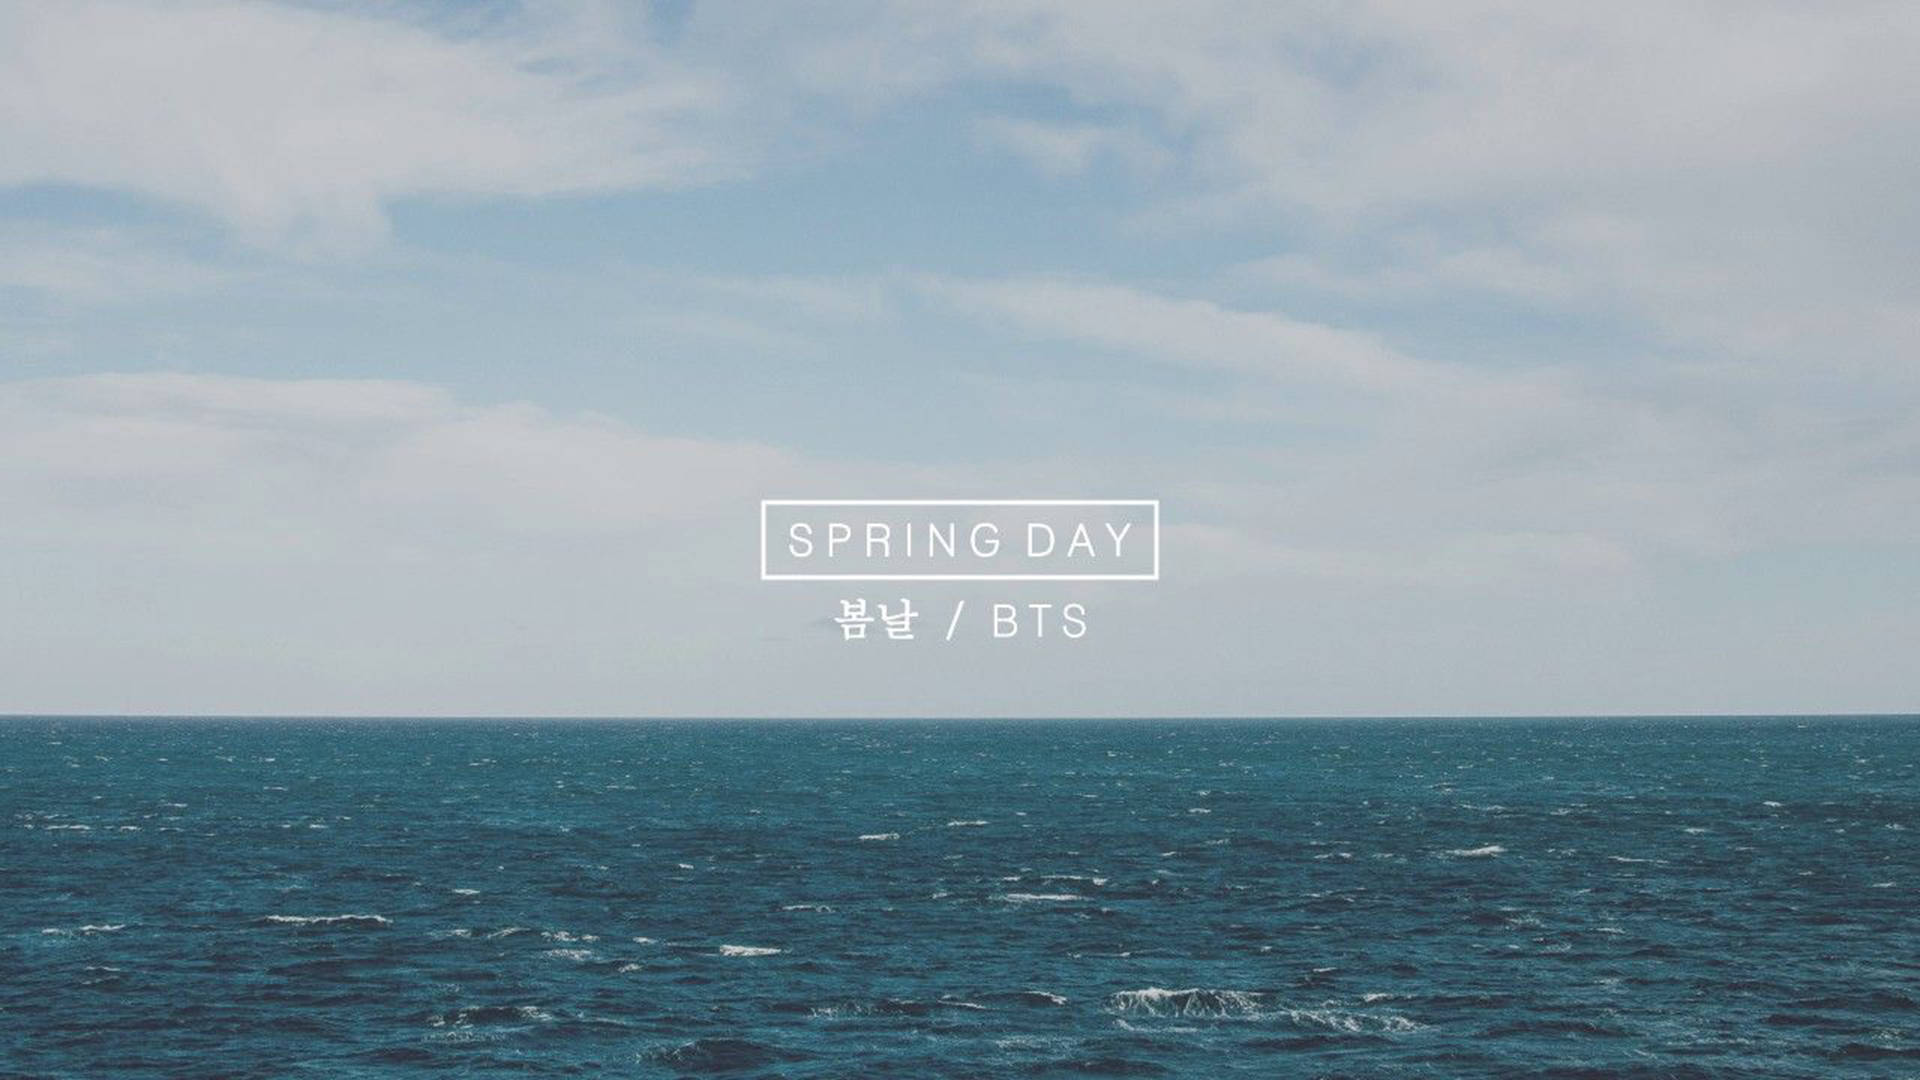 Bts Spring Day At Sea Laptop Background